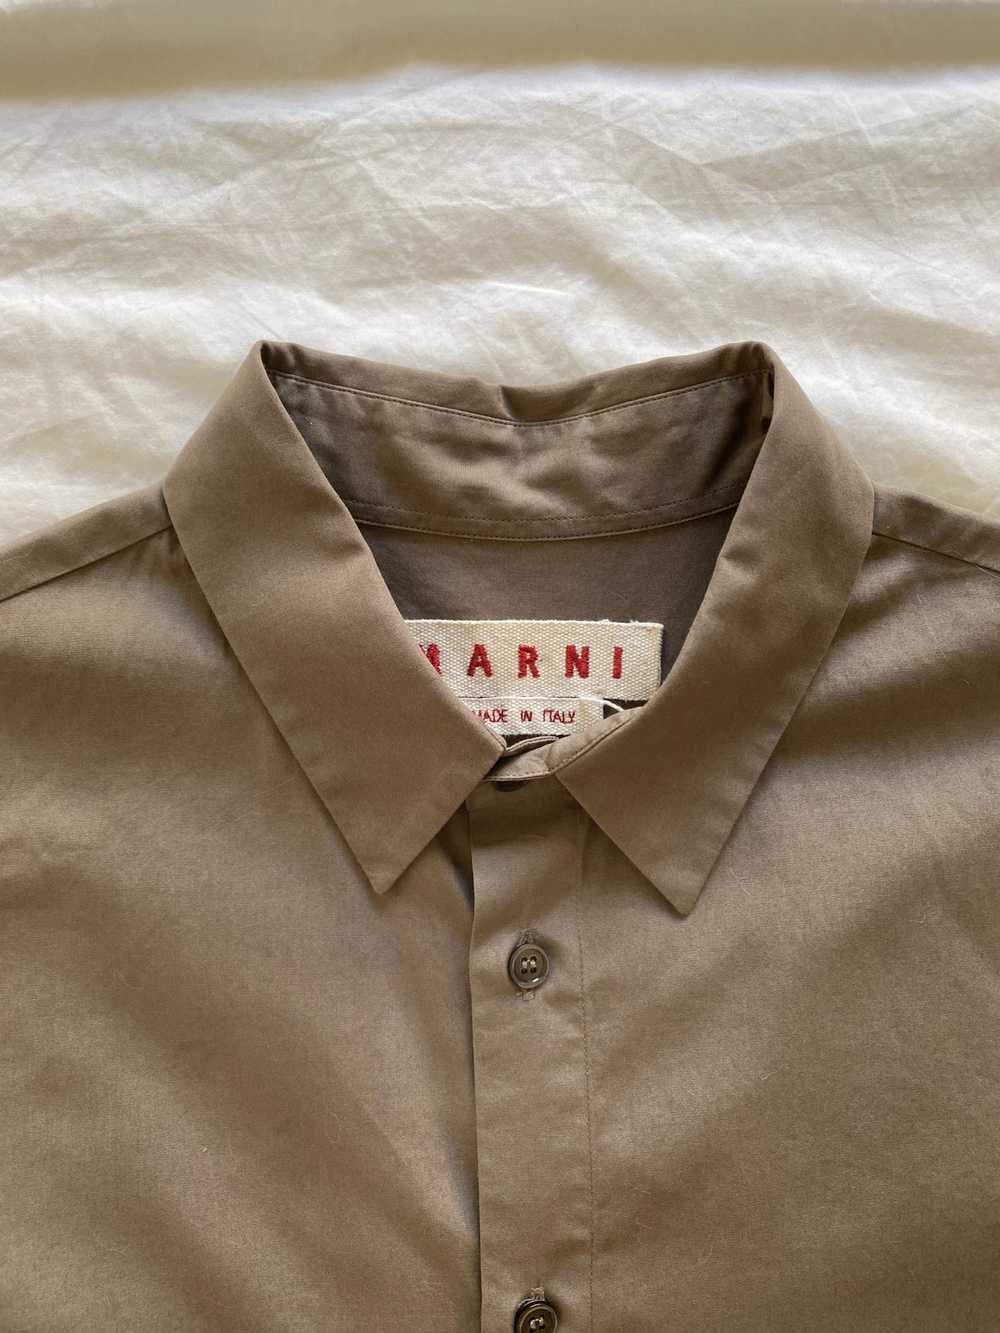 Marni Brown Fitted Dress Shirt - image 2